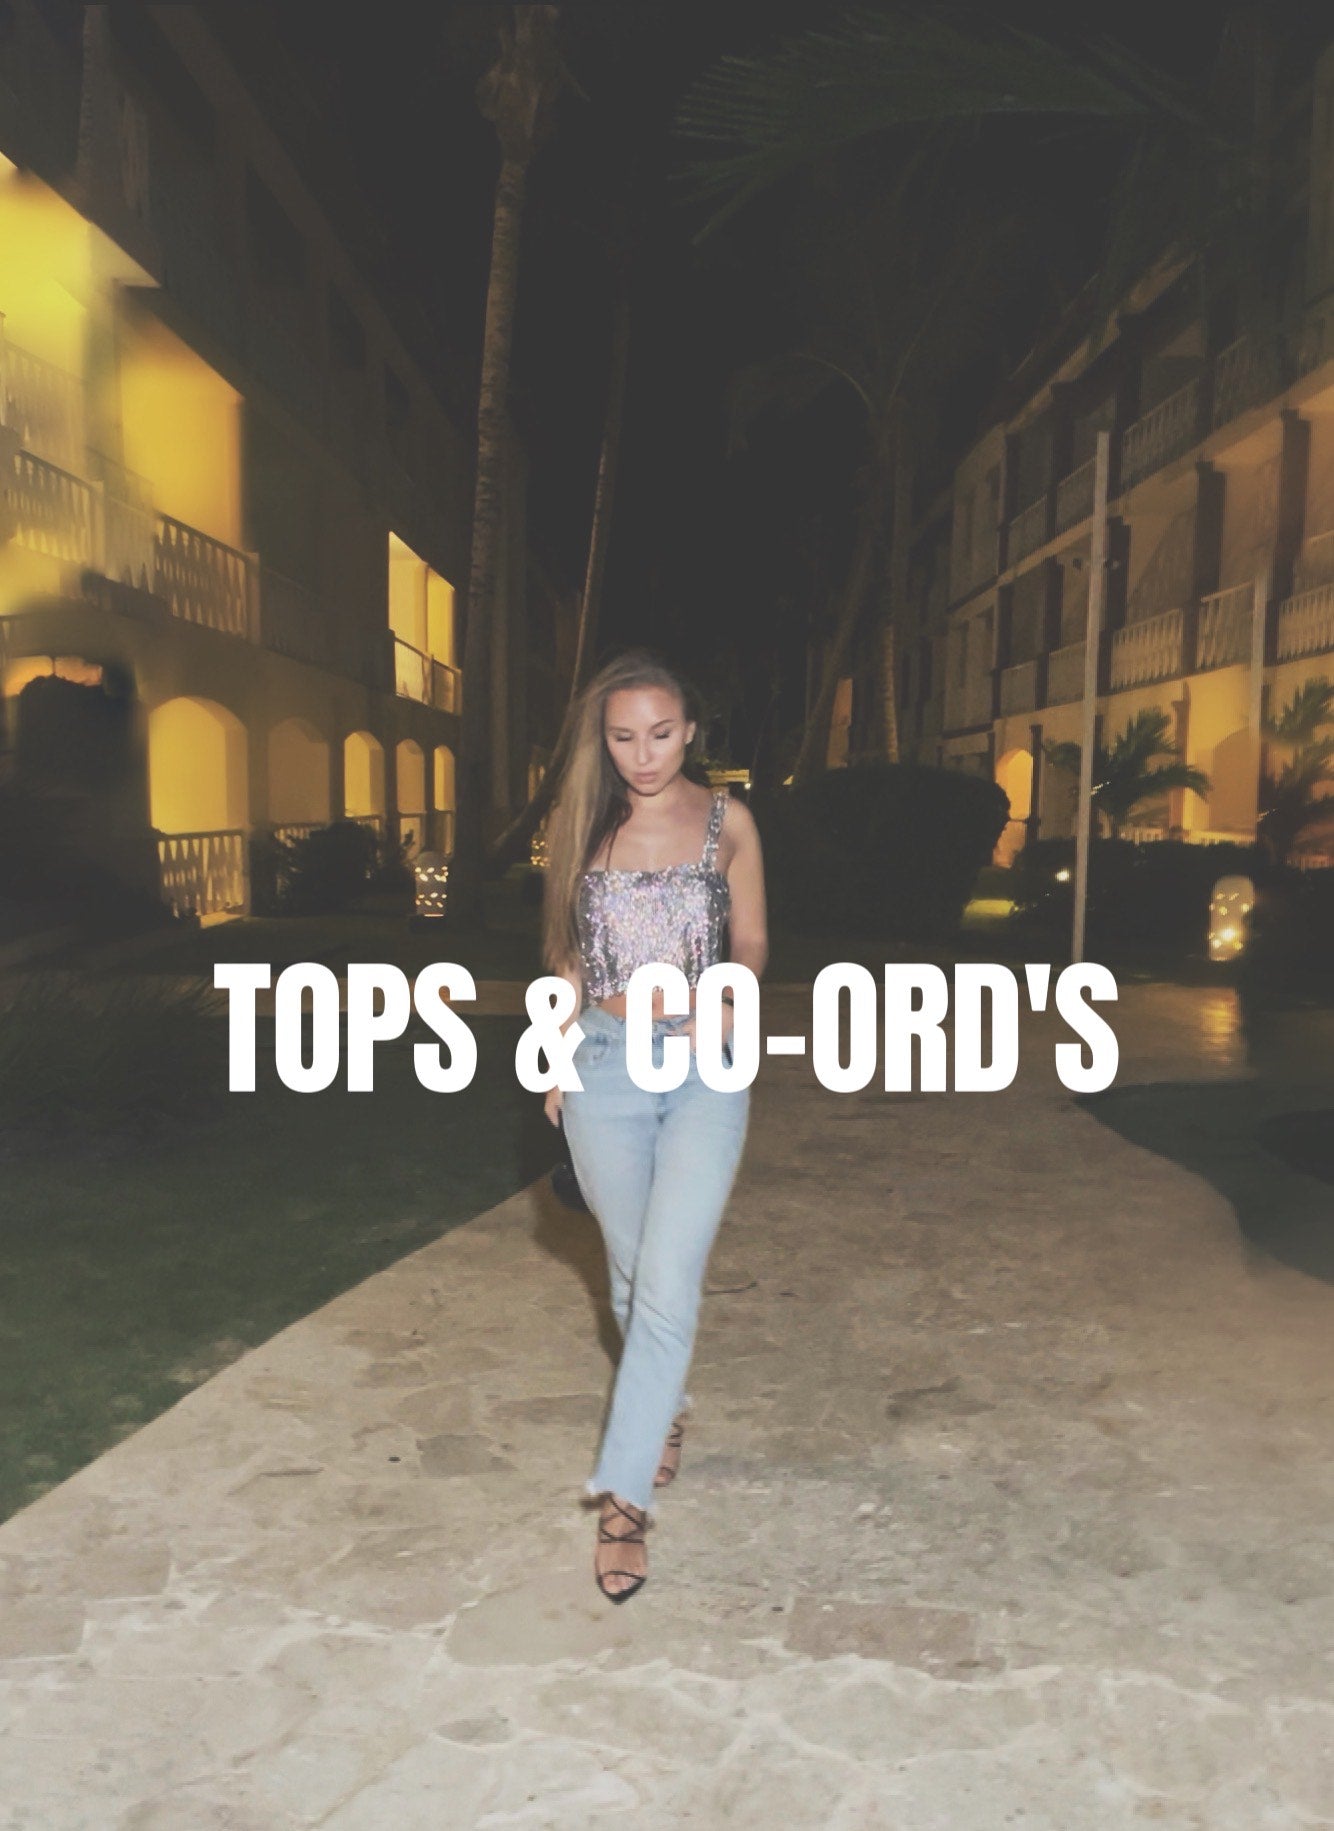 TOPS & CO-ORD'S